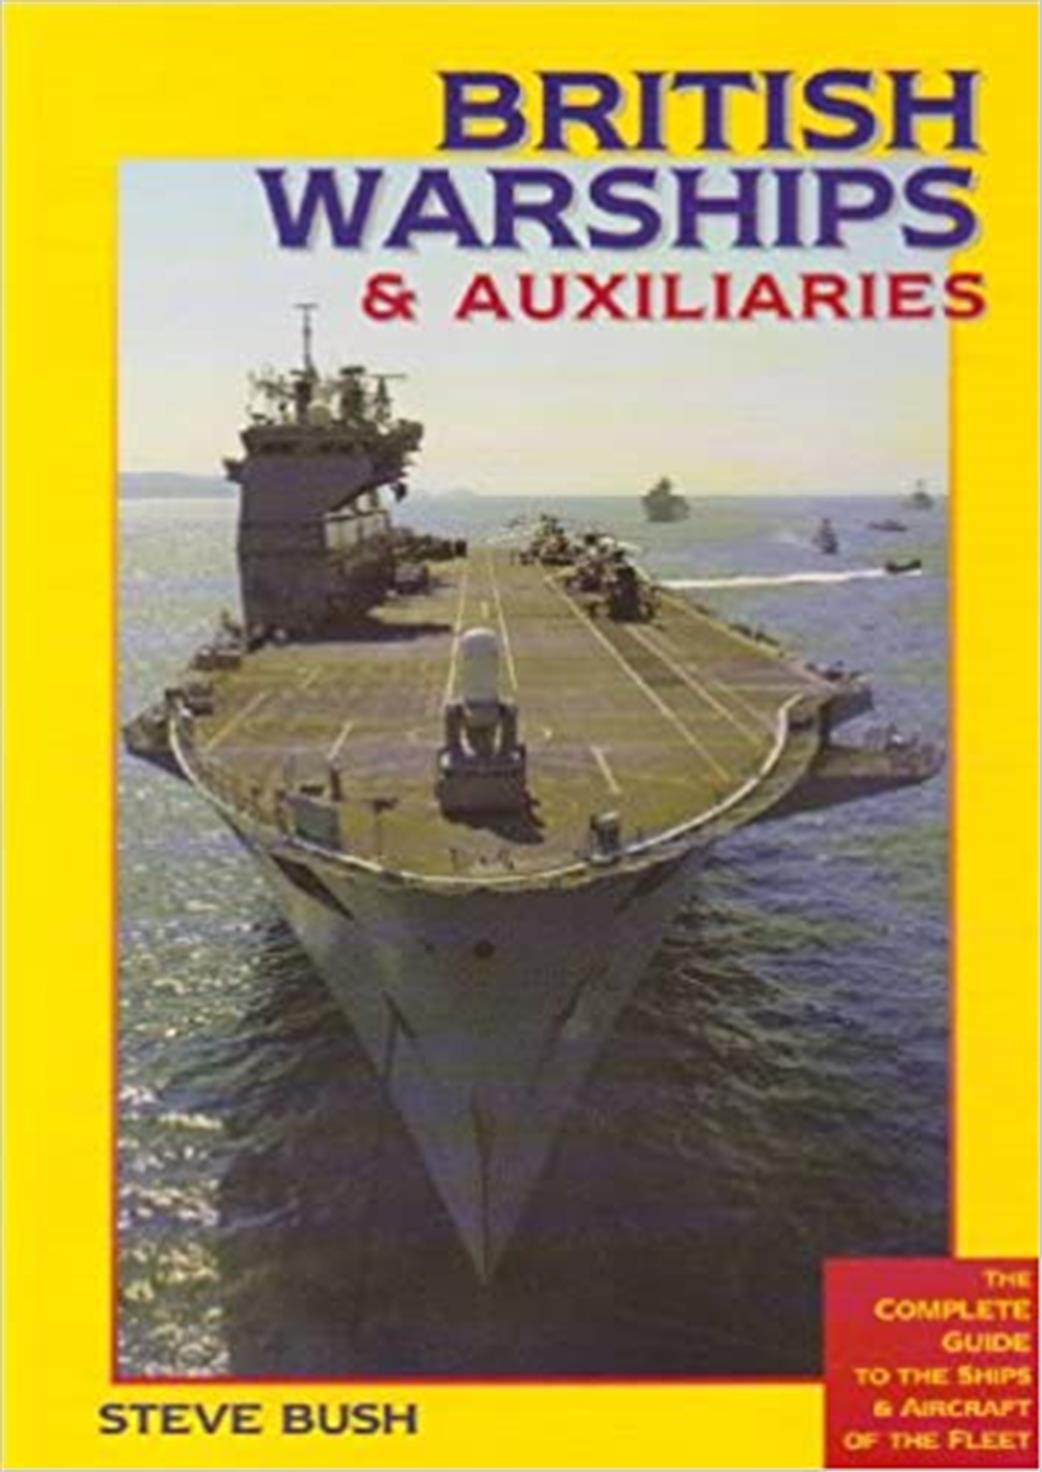 9781904459408 British Warships & Auxiliaries reference book by Steve Bush